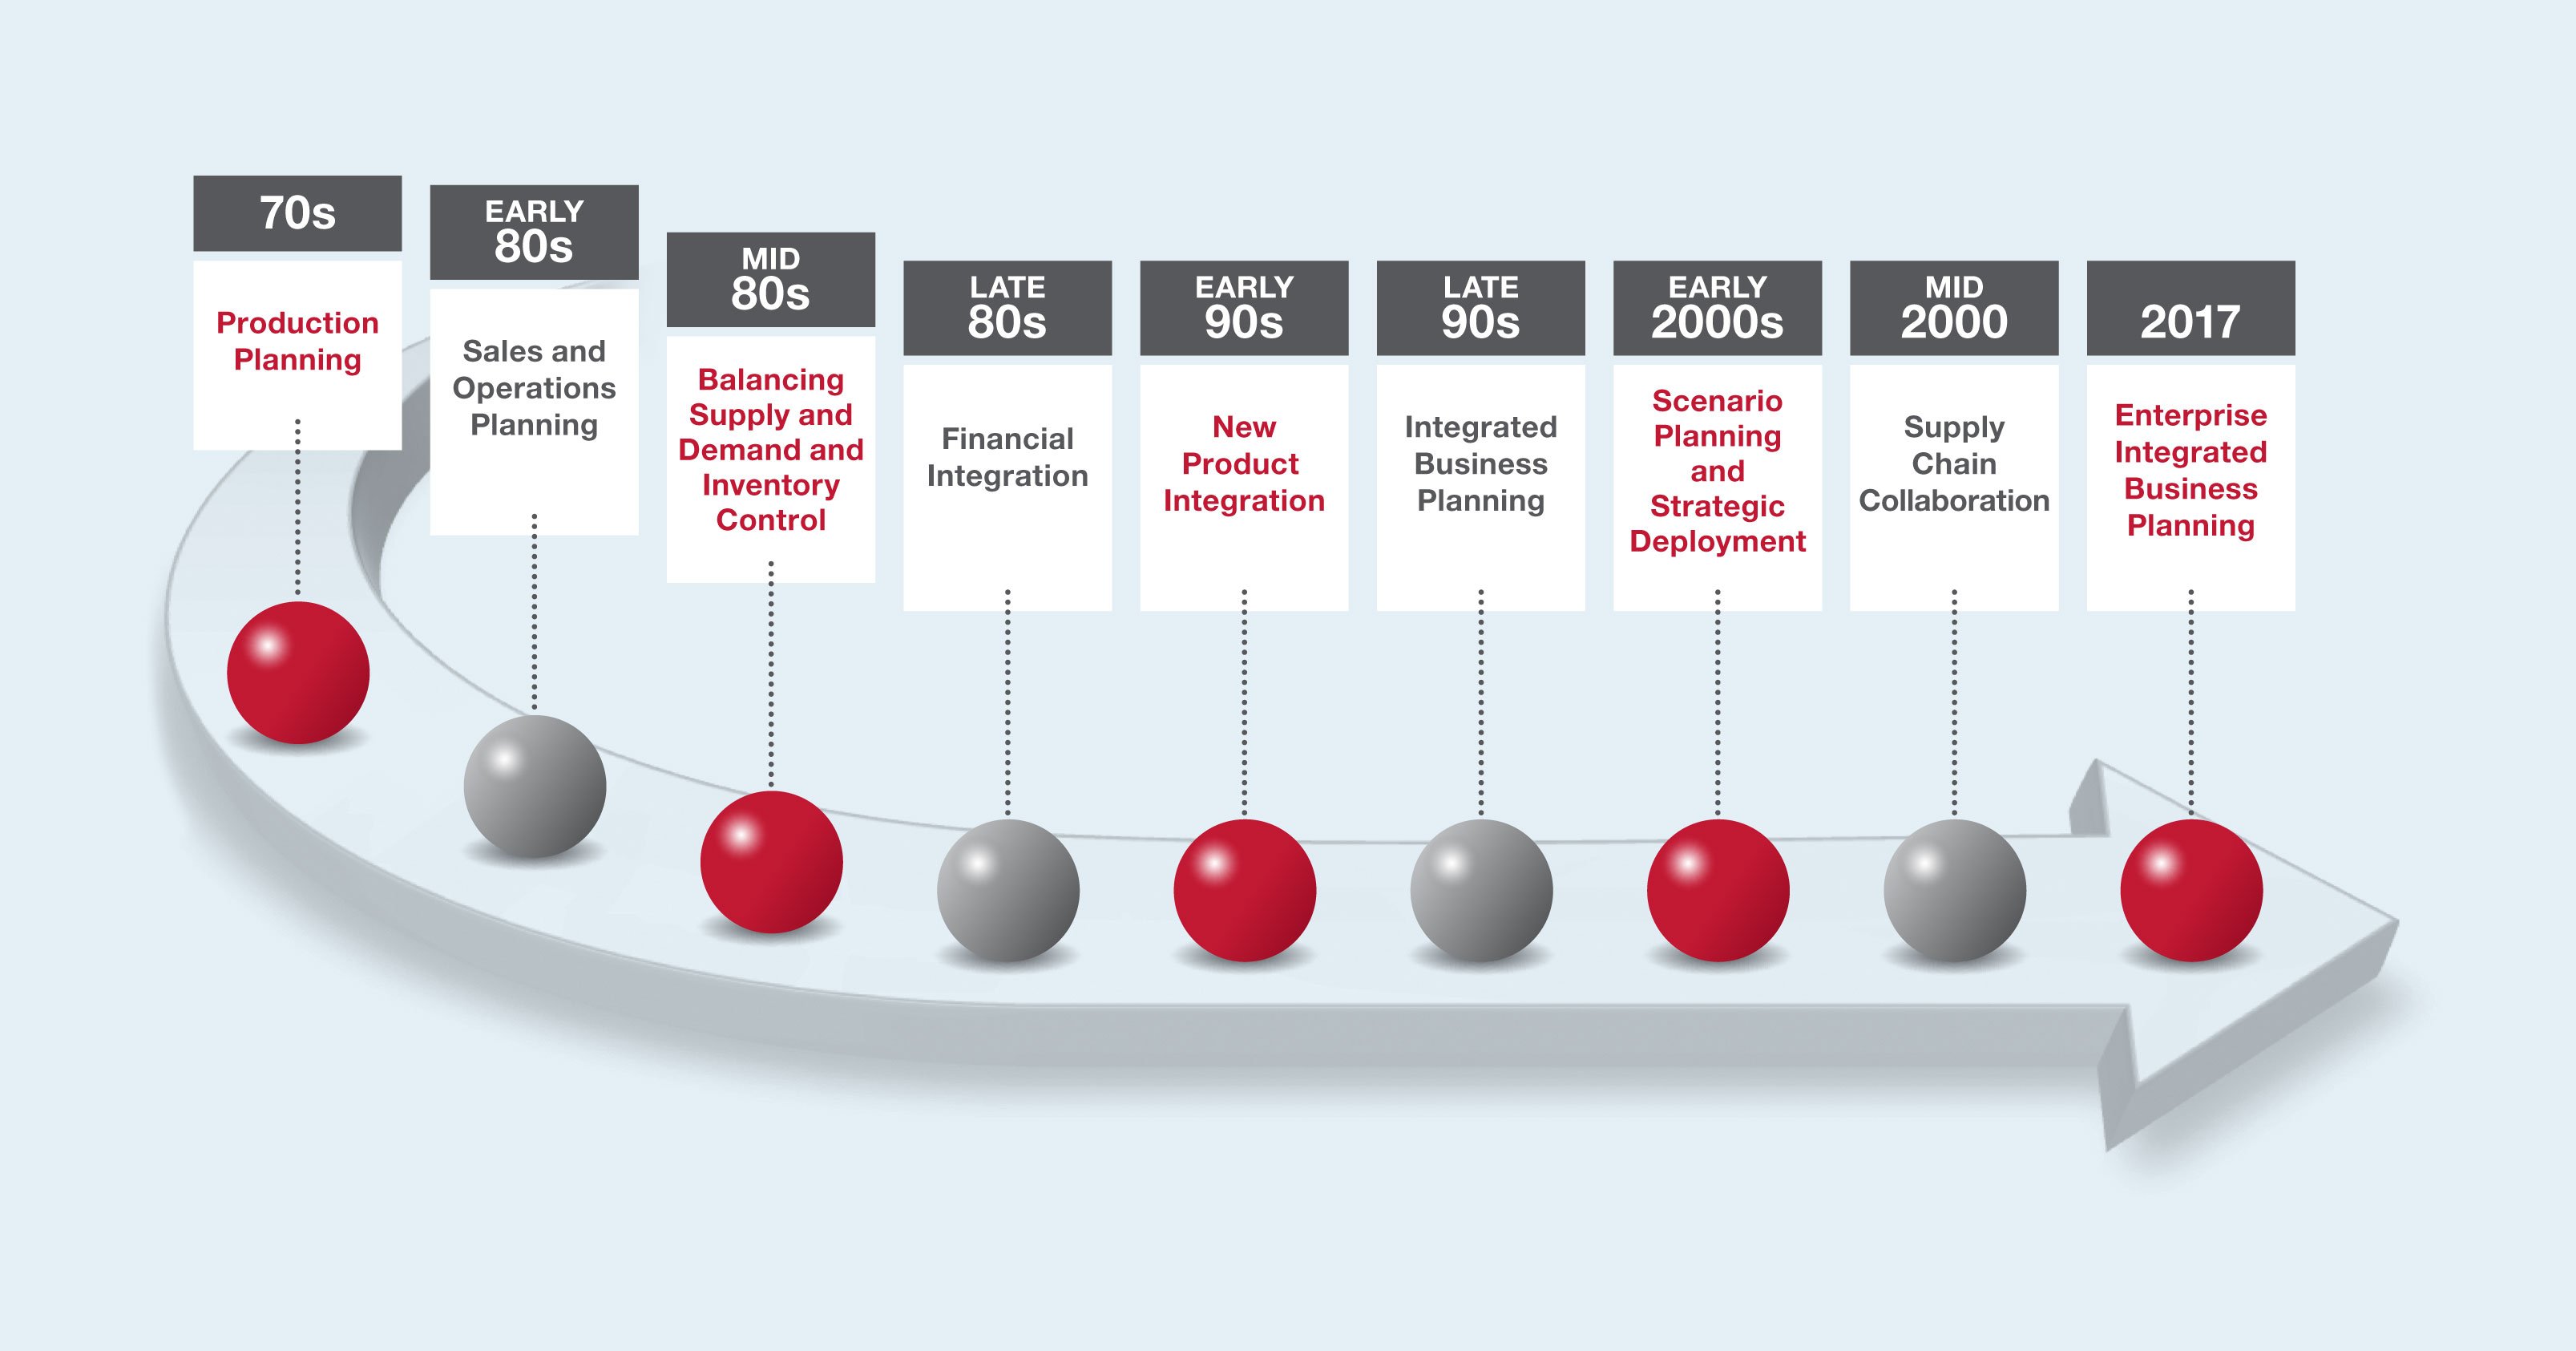 The evolution of Integrated Business Planning (Illustration)